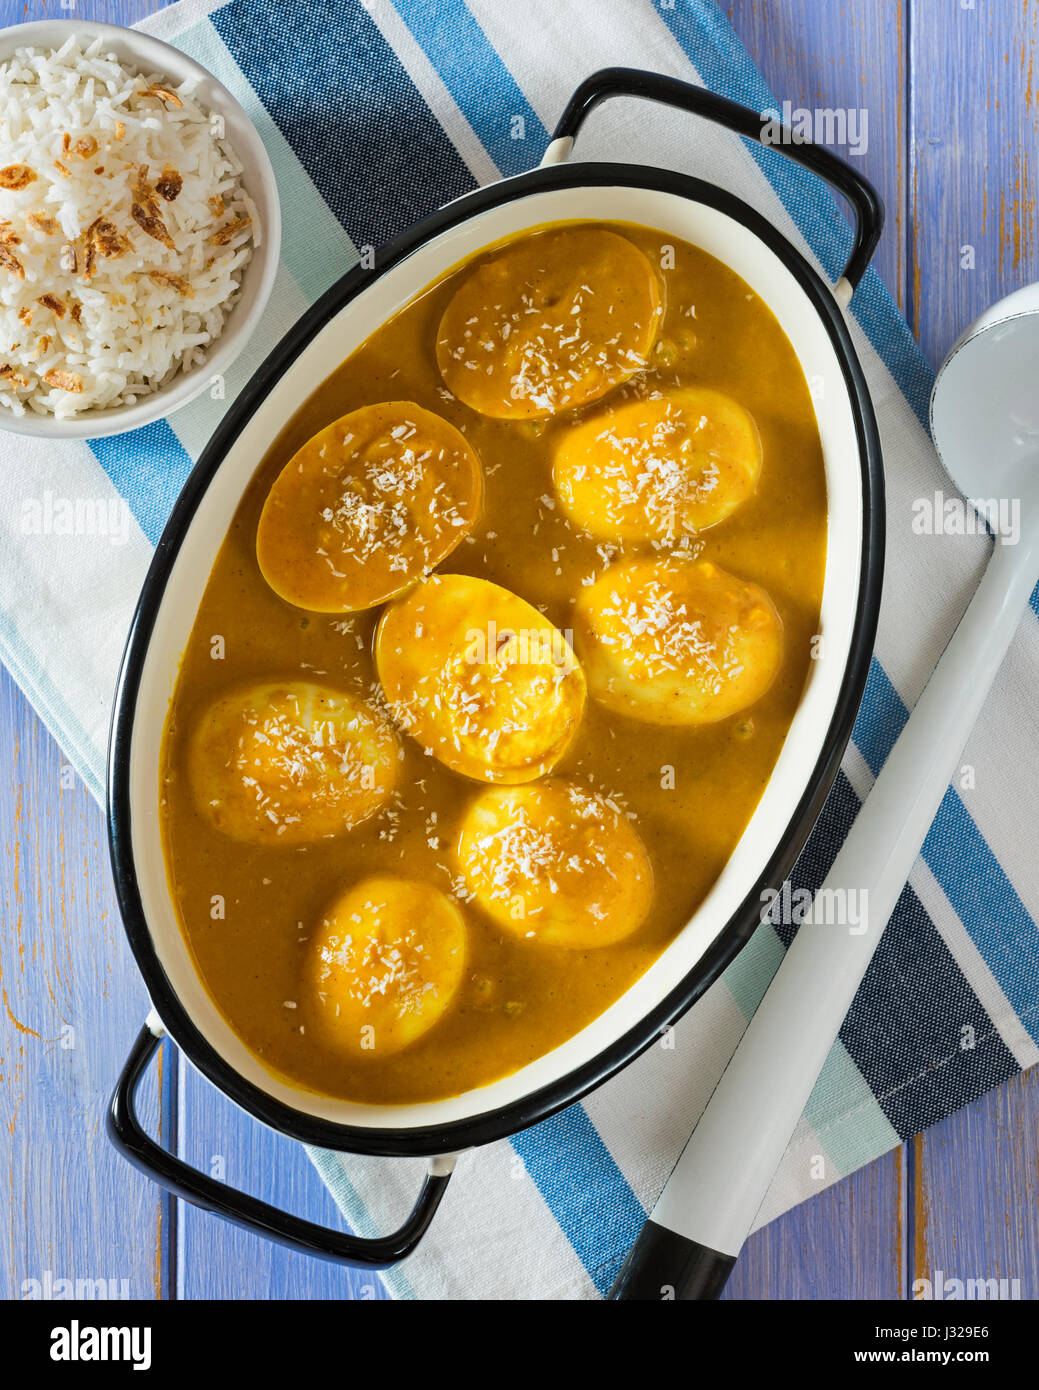 Curried eggs and rice Stock Photo